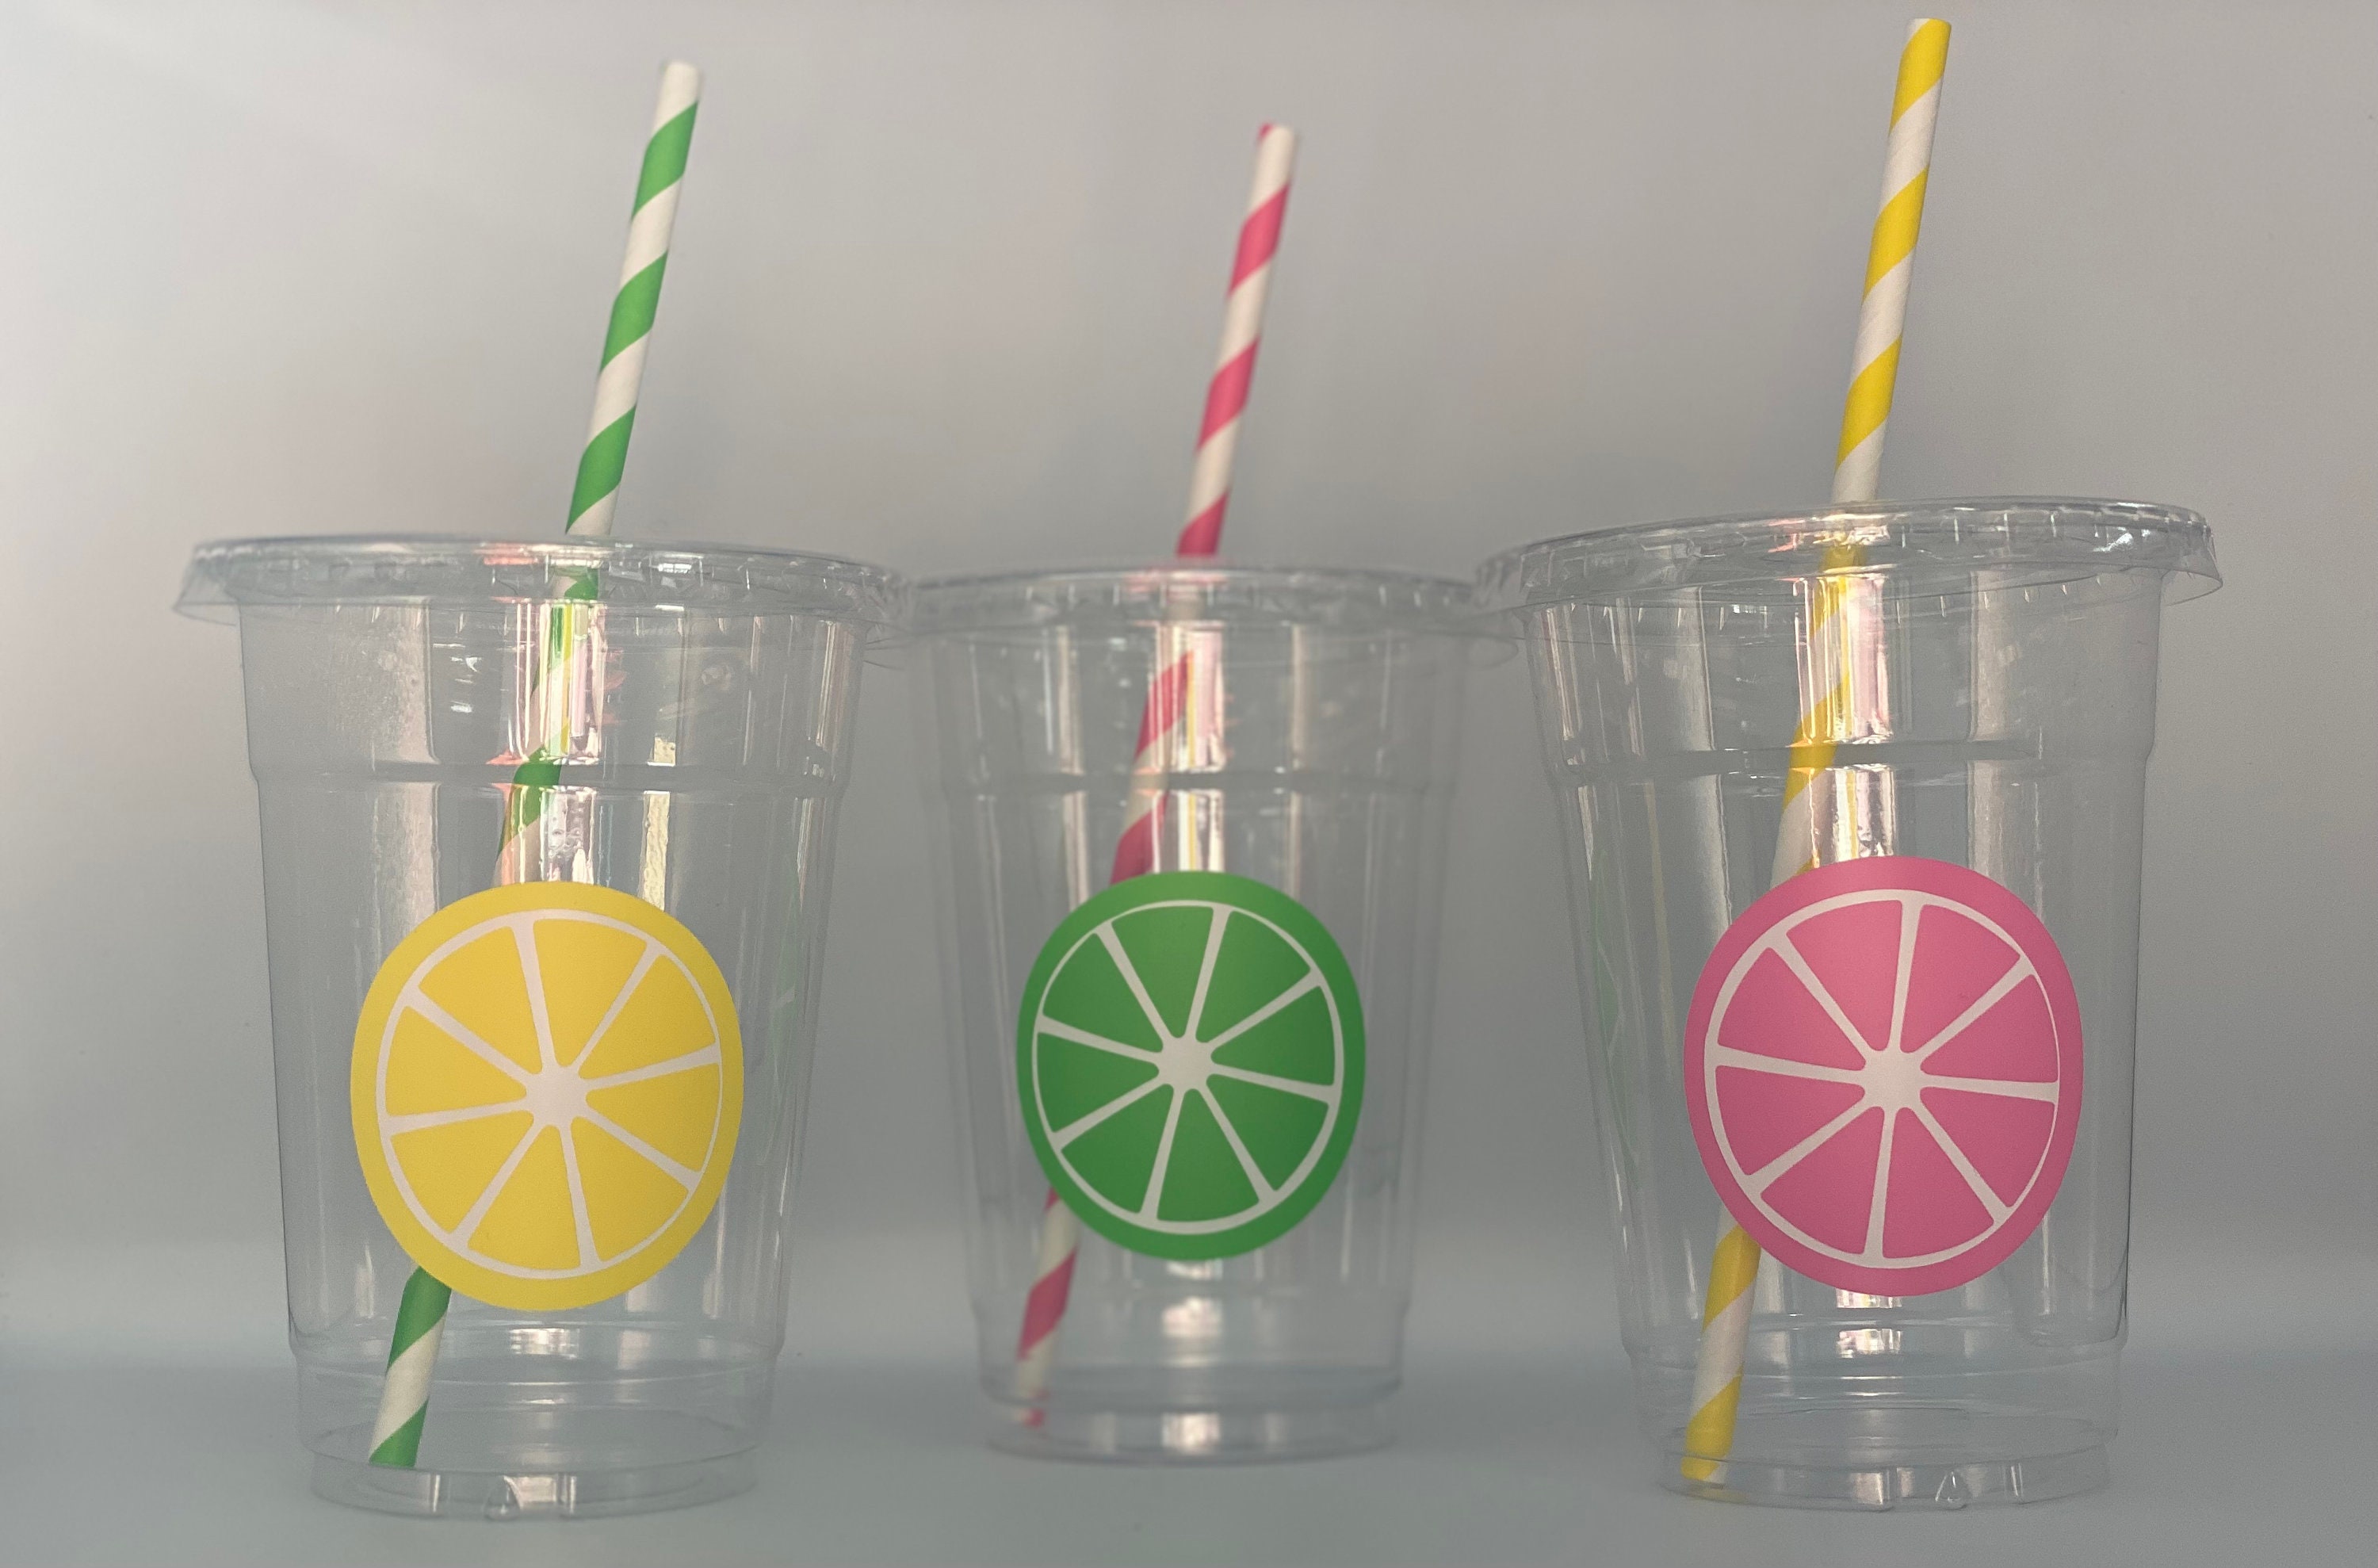 Lemon Mango Cup Straw Toppers set of 3 for Tumbler, Straw Cup